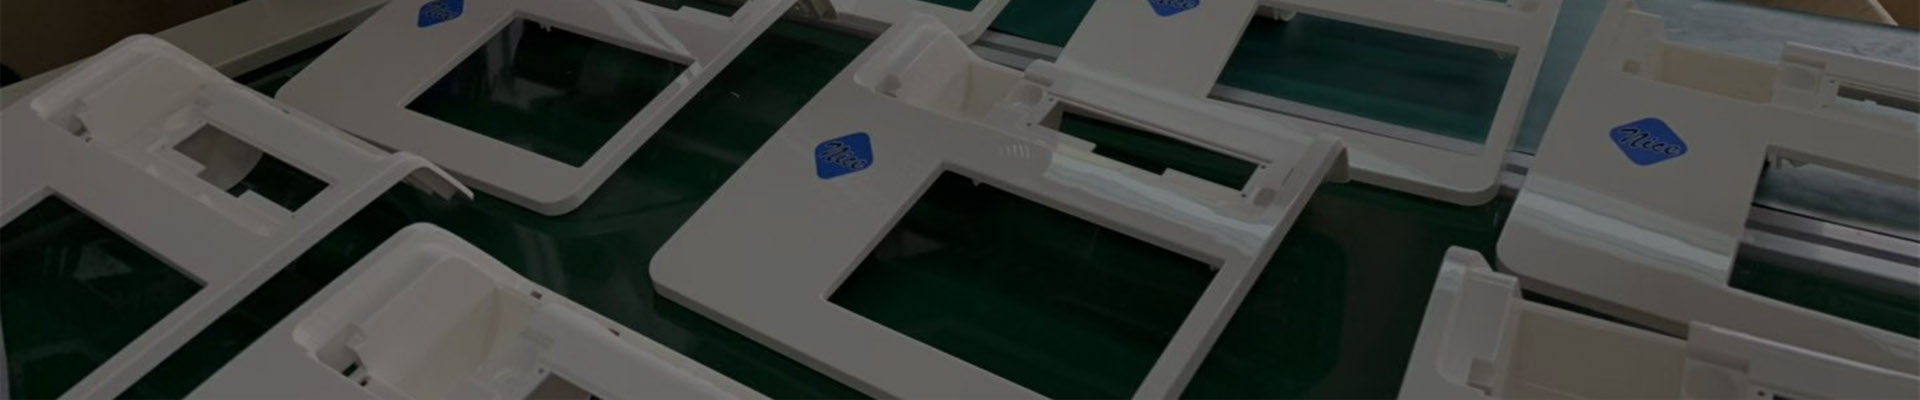 Injection Molding Services